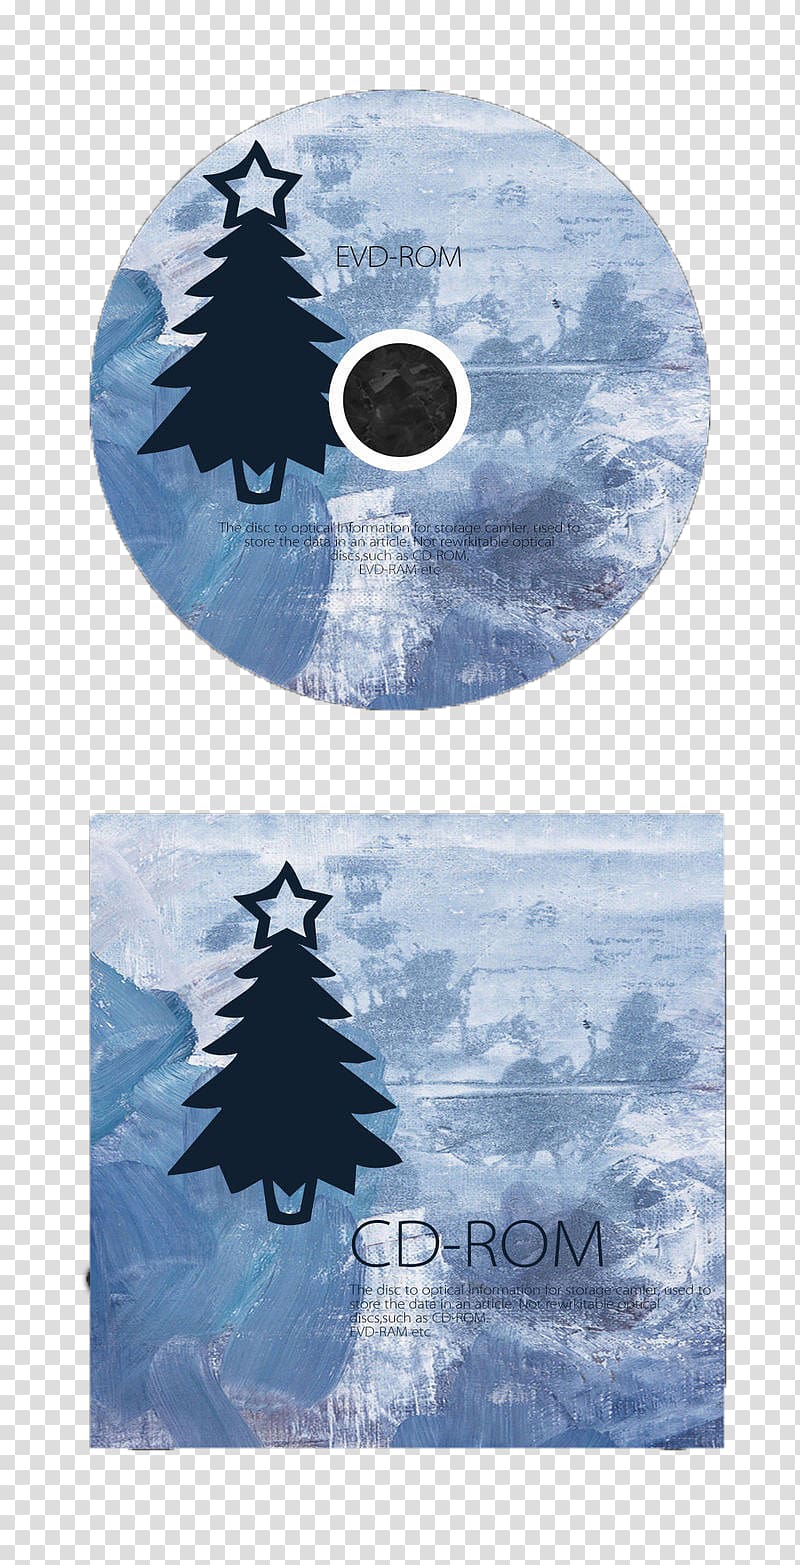 Packaging and labeling Graphic design Compact disc, Free Christmas CD packaging design creative buckle transparent background PNG clipart